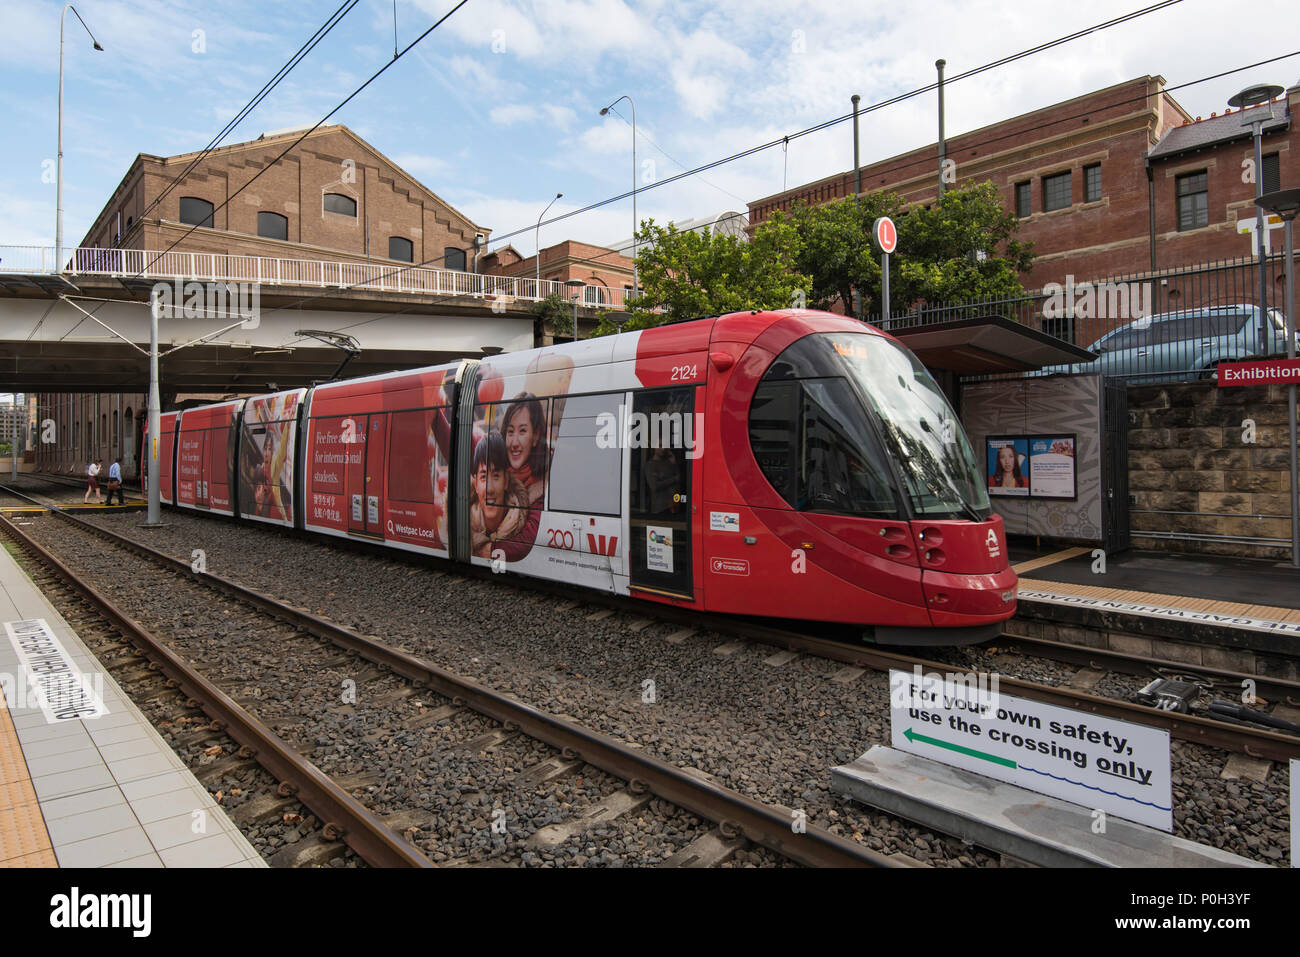 A Sydney Light Rail train or tram at the Exhibition Centre station in Sydney, Australia Stock Photo